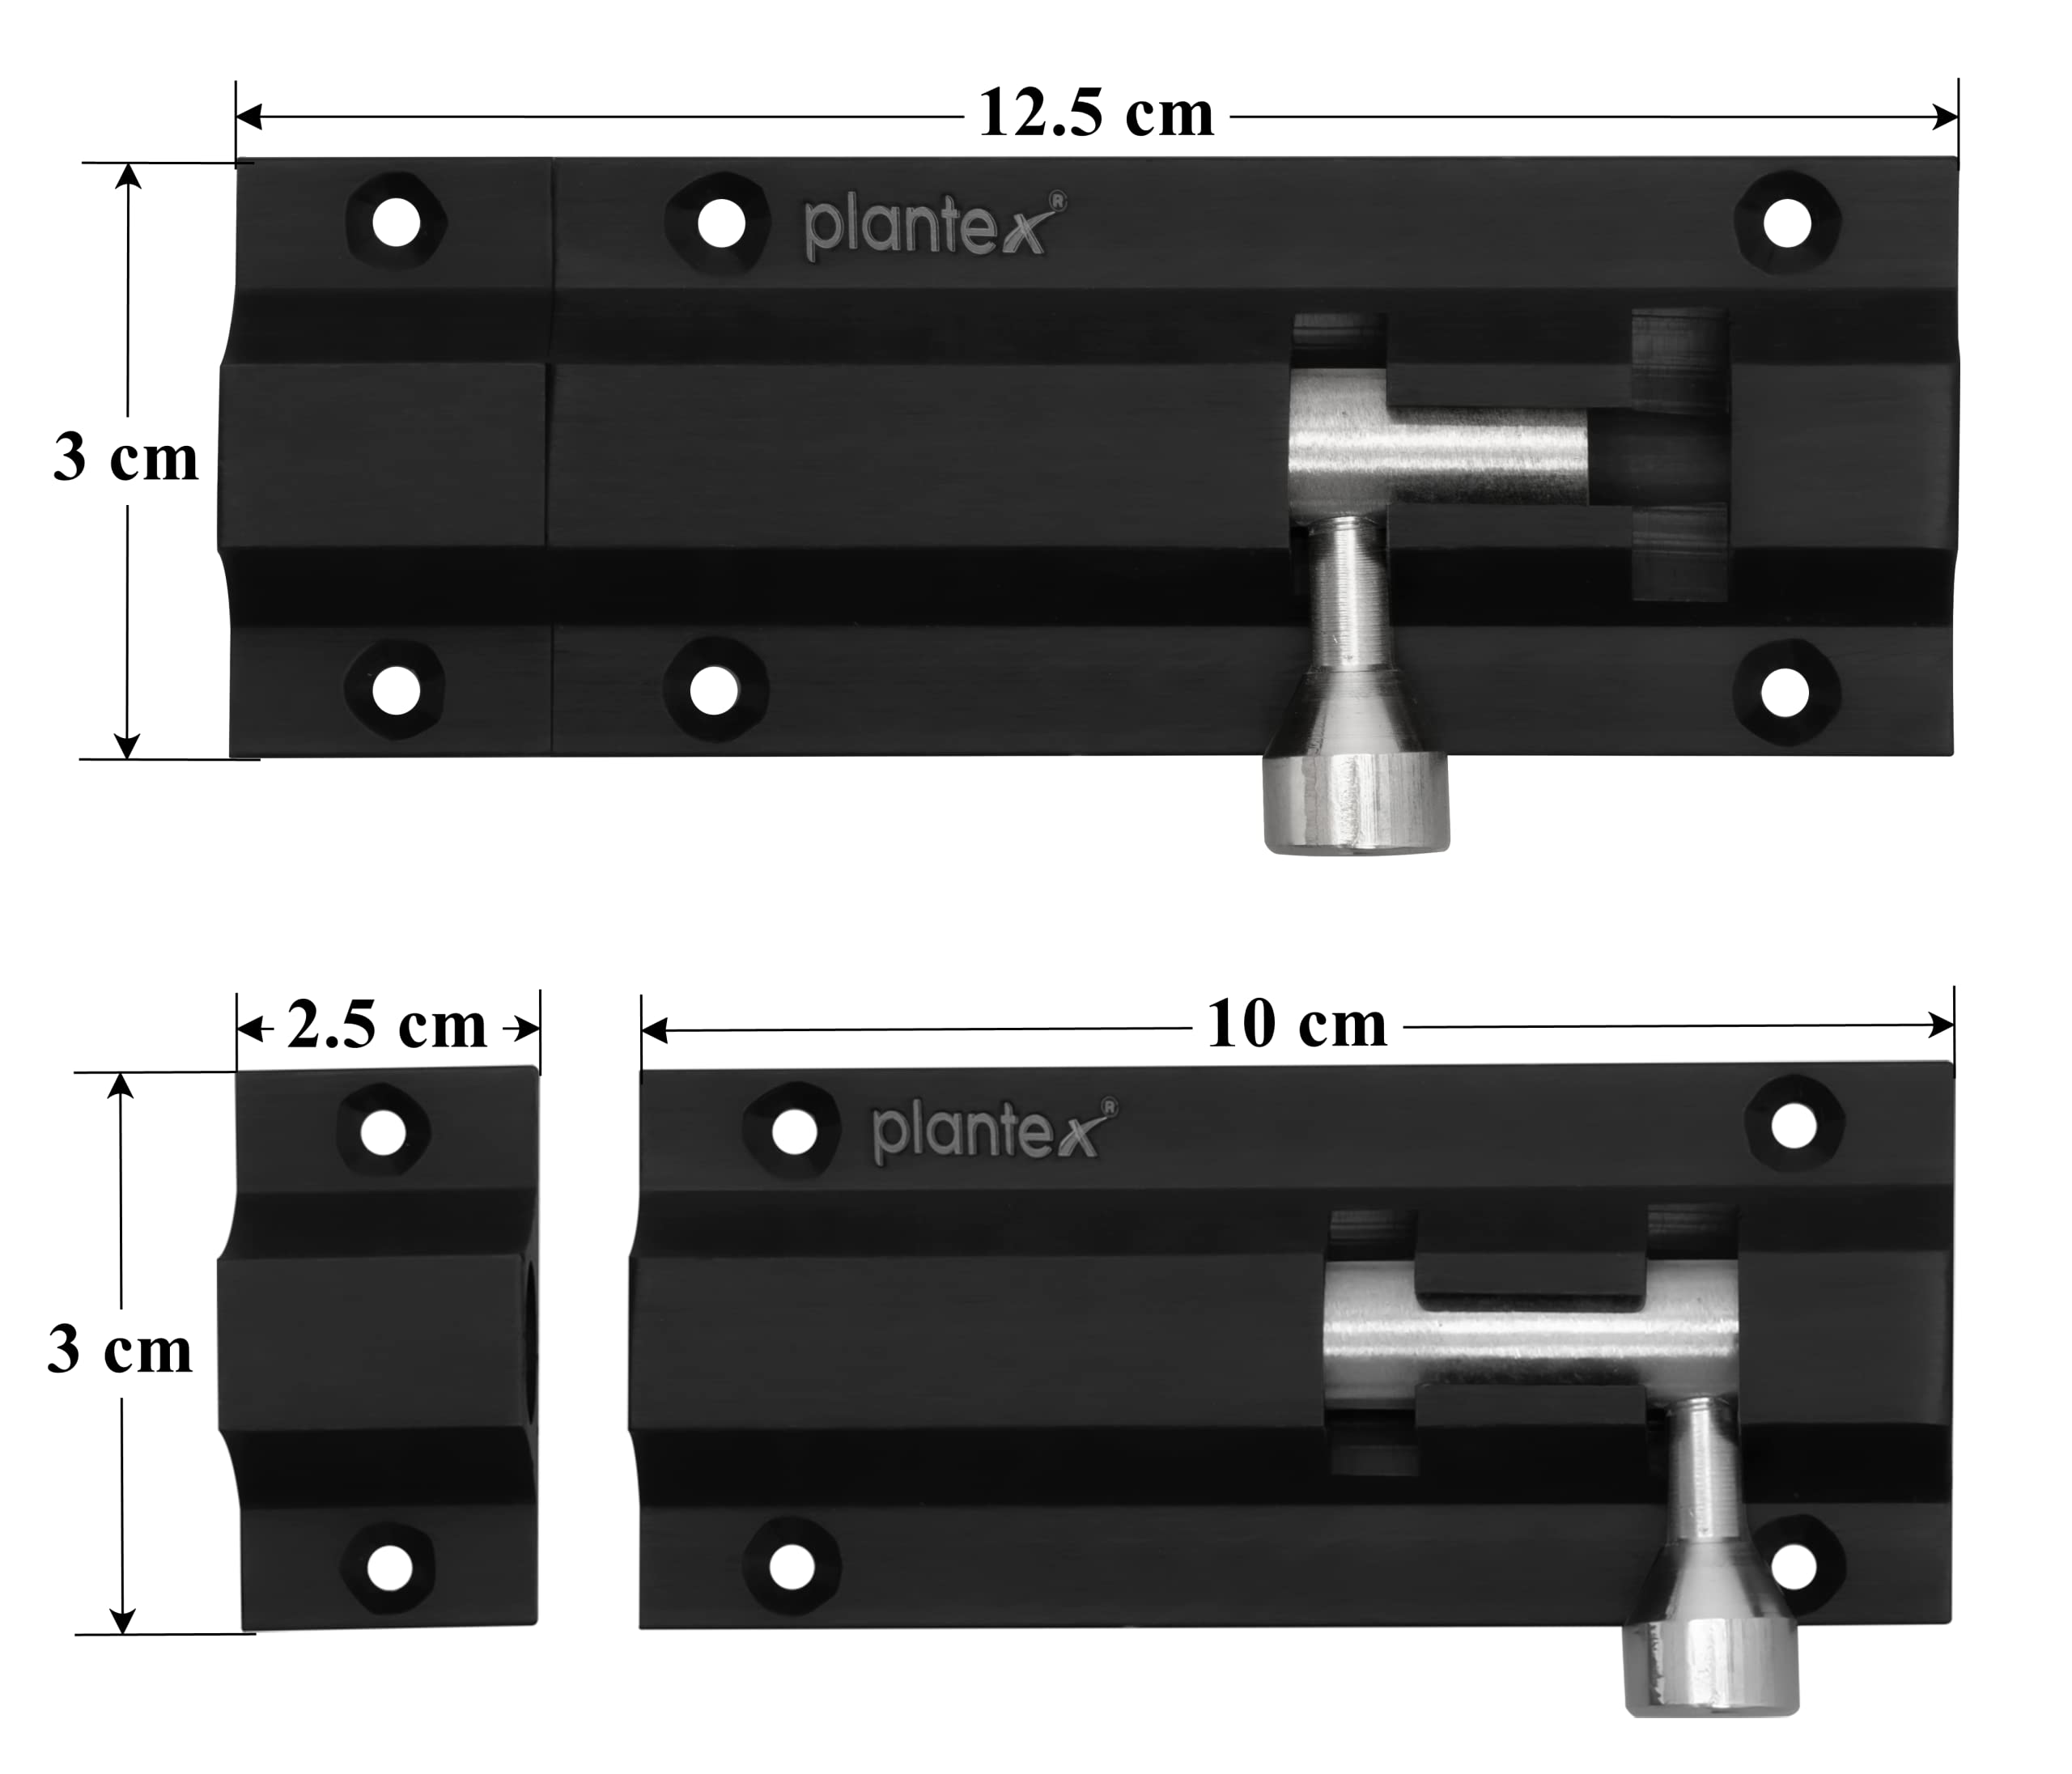 Plantex Heavy Duty 4-inch Joint-Less Tower Bolt for Wooden and PVC Doors for Home Main Door/Bathroom/Windows/Wardrobe - Pack of 6 (704, Black)